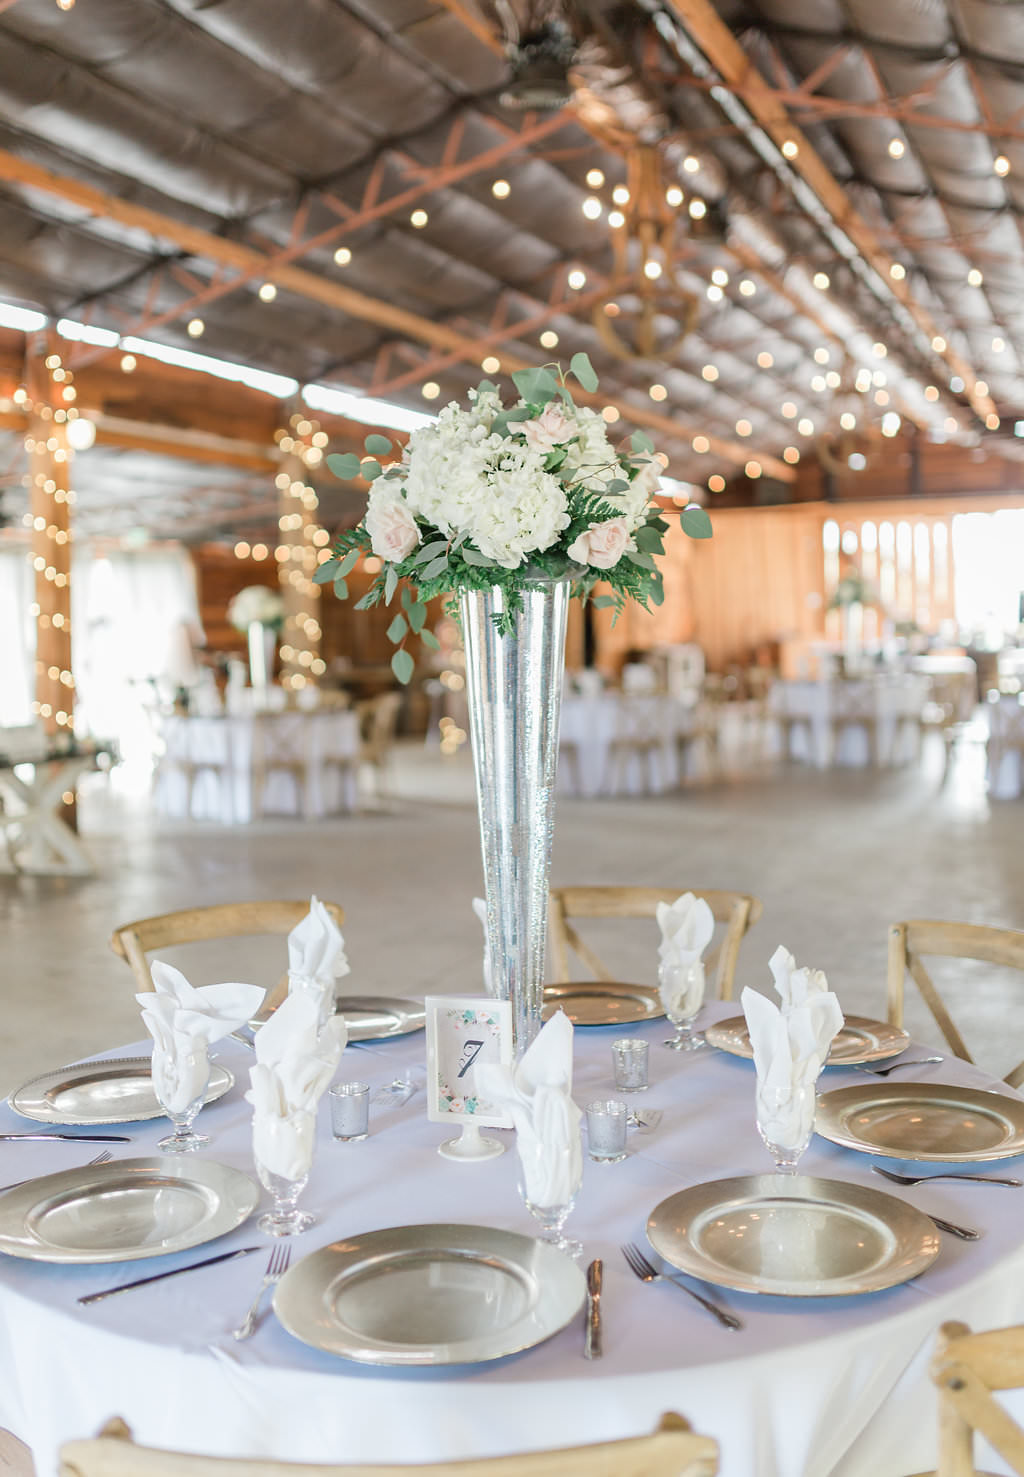 Rustic Elegant Tampa Bay Barn Reception Decor, Round Tables with Grey Tablecloths, Silver Chargers, Tall Blush Pink Roses, White Hydrangeas and Greenery Floral Centerpiece in Silver Vase, Table Number in White Frame, Wood Chiavari Chairs | Plant City Wedding Venue Florida Rustic Barn Weddings